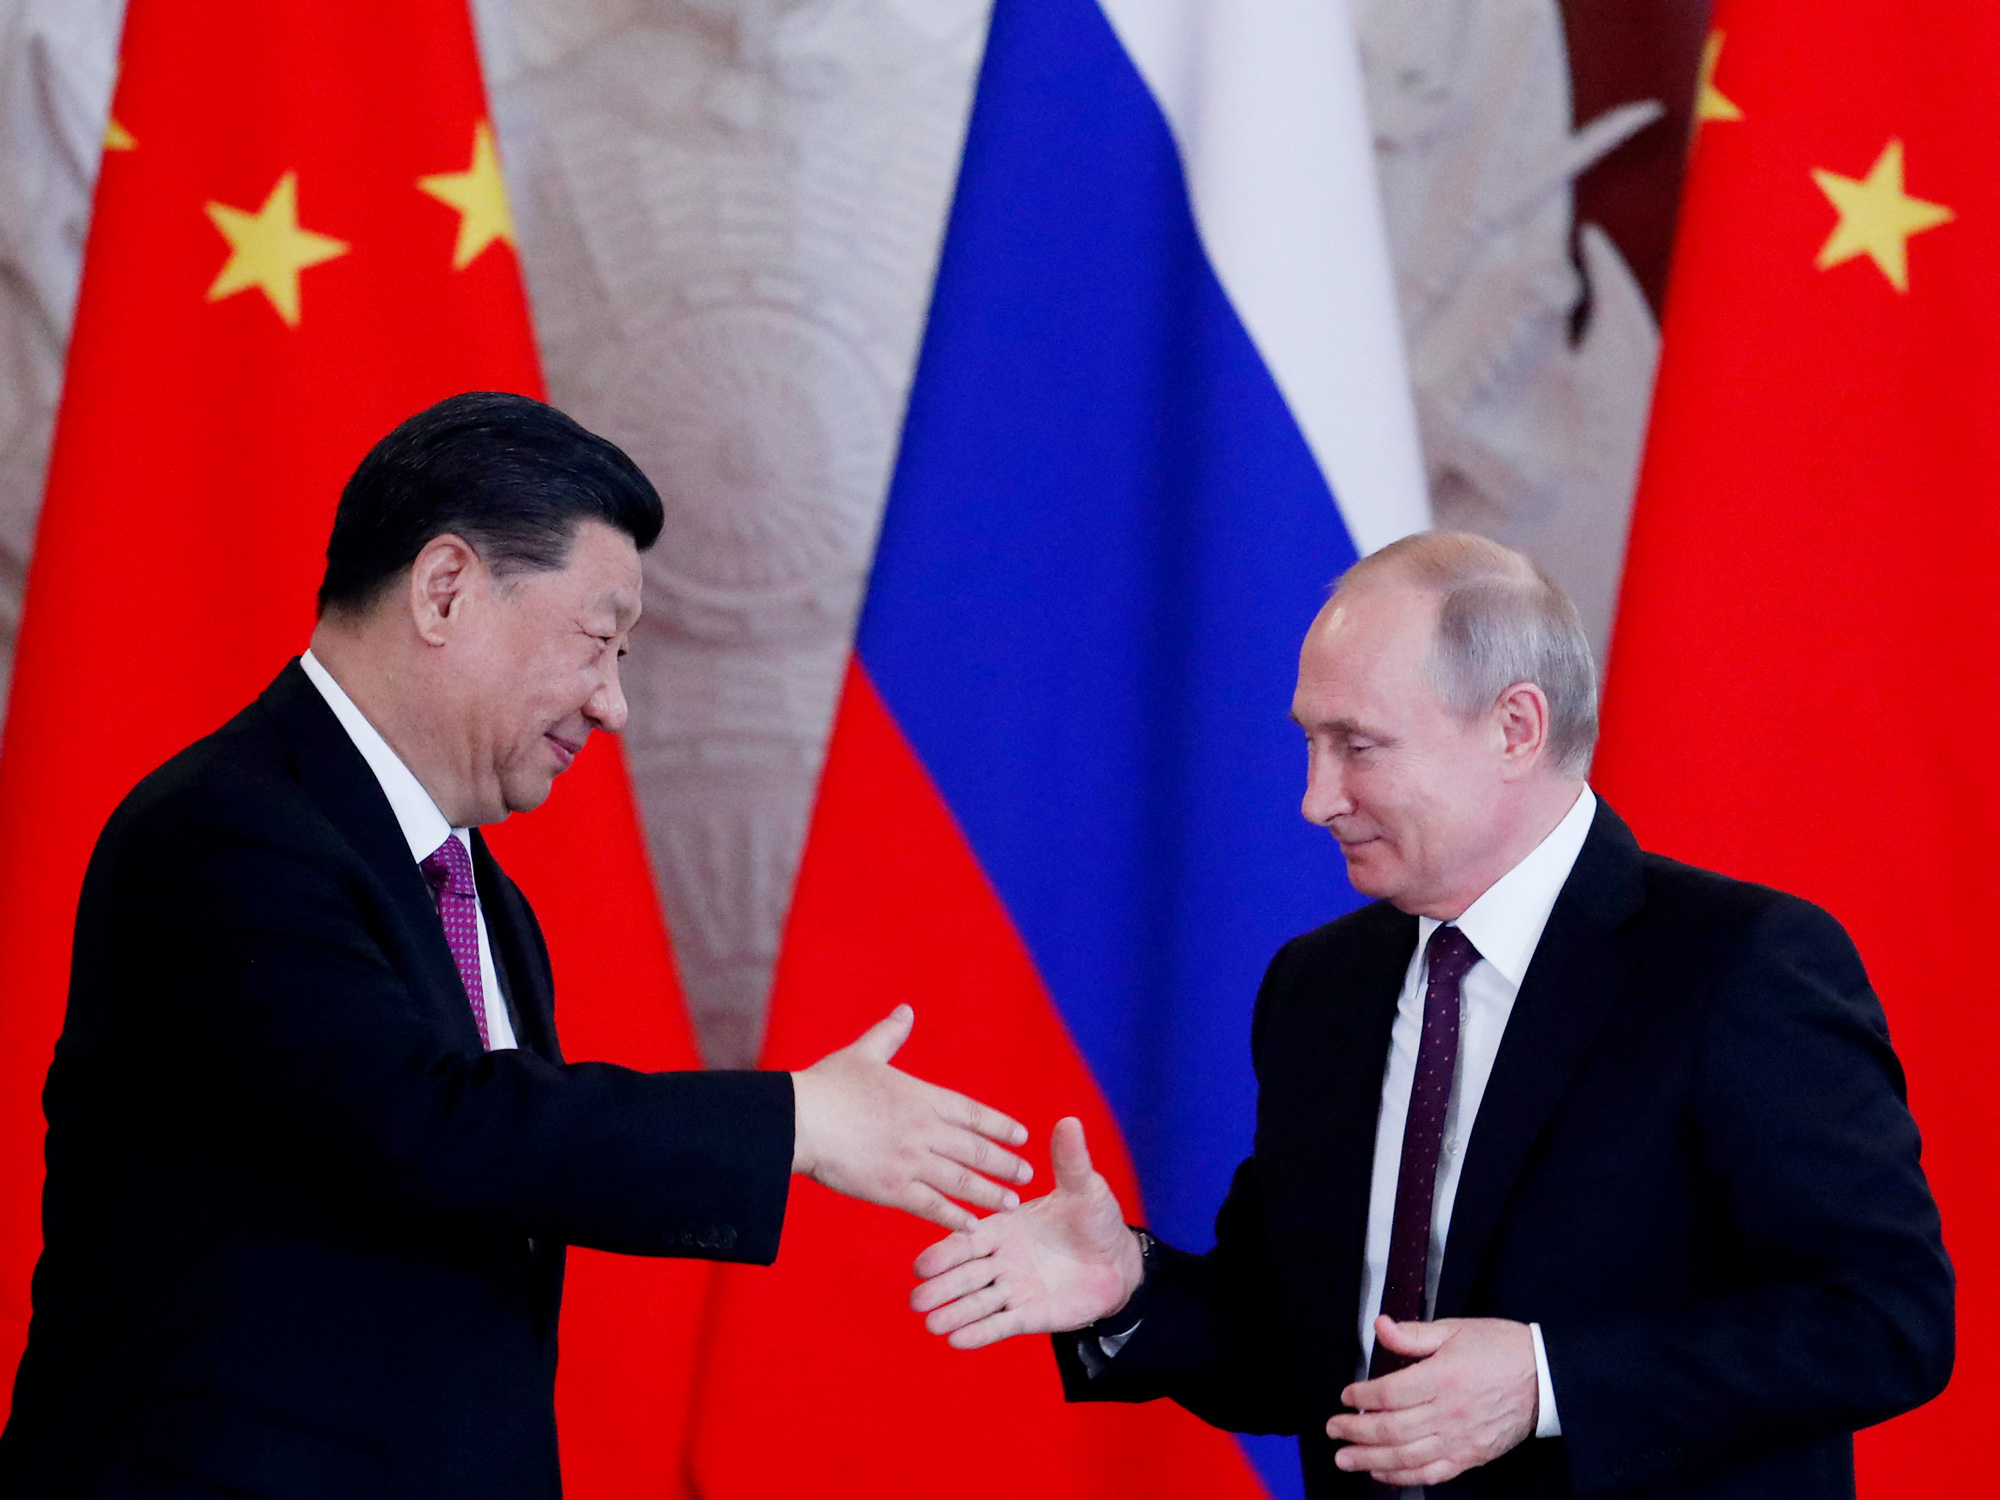 Both Xi and Putin Stand to Gain From Their Moscow Meeting - Bloomberg